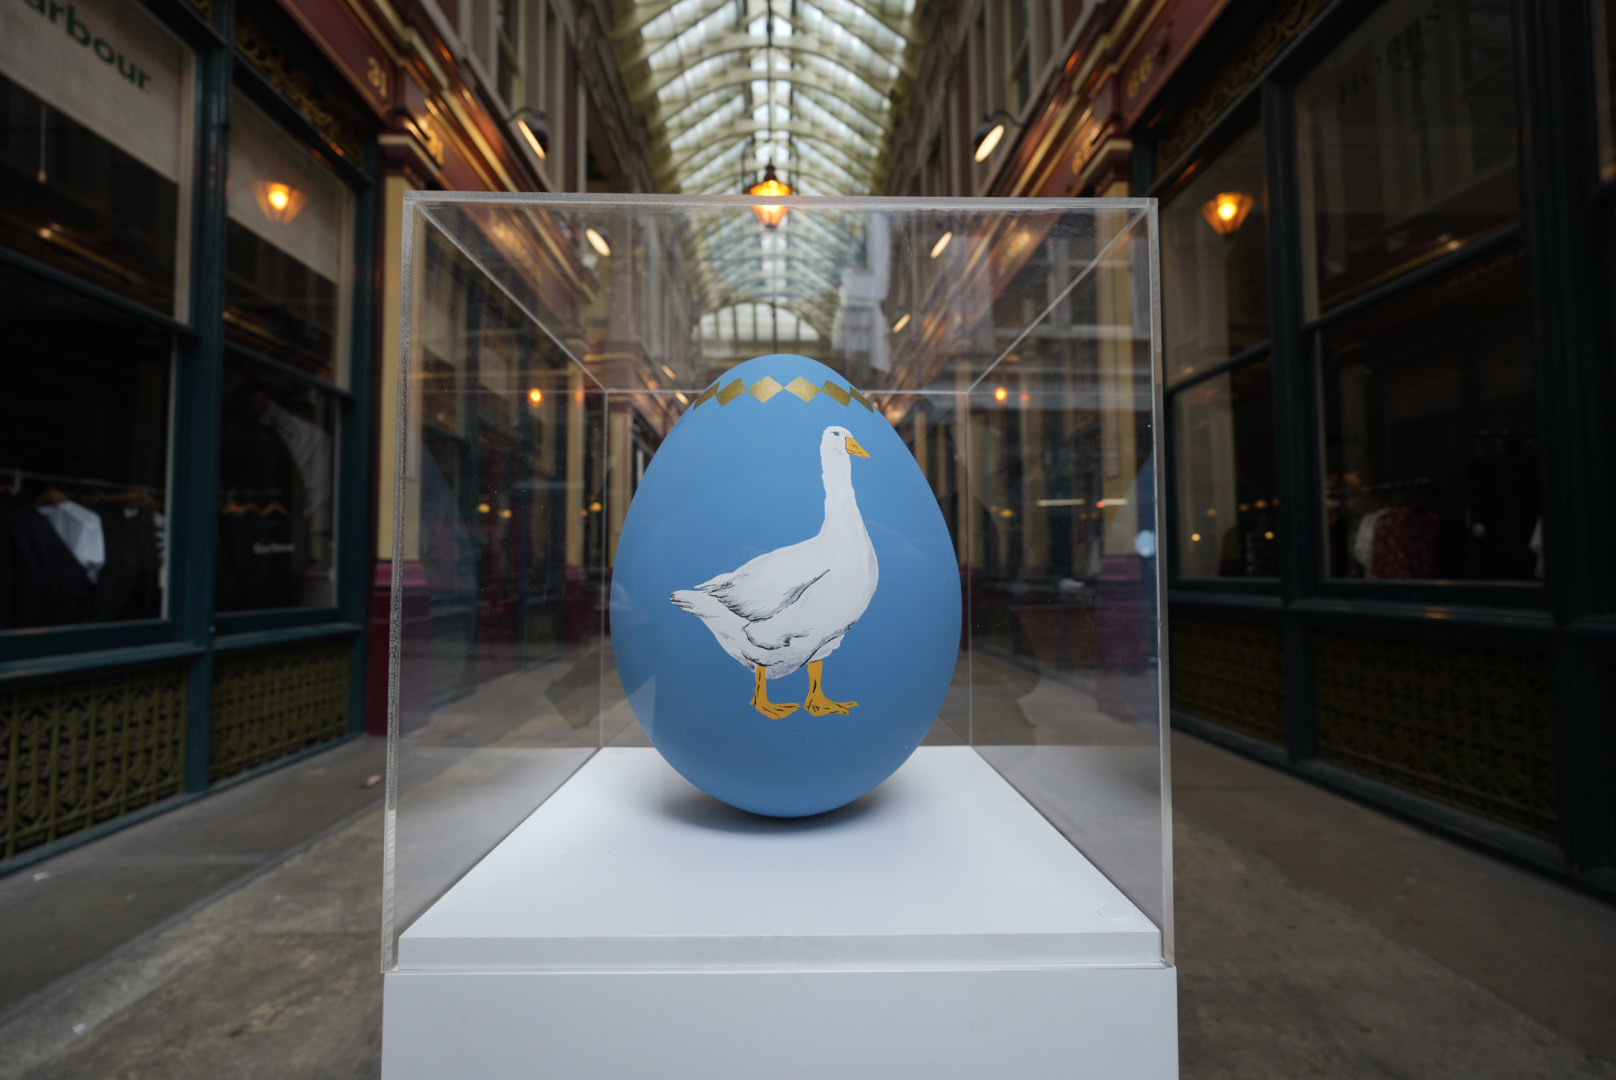 An blue Easter Egg with a duck painted on it is on display in a box at Leadenhall Market, as part of the Easter trail for EC BID